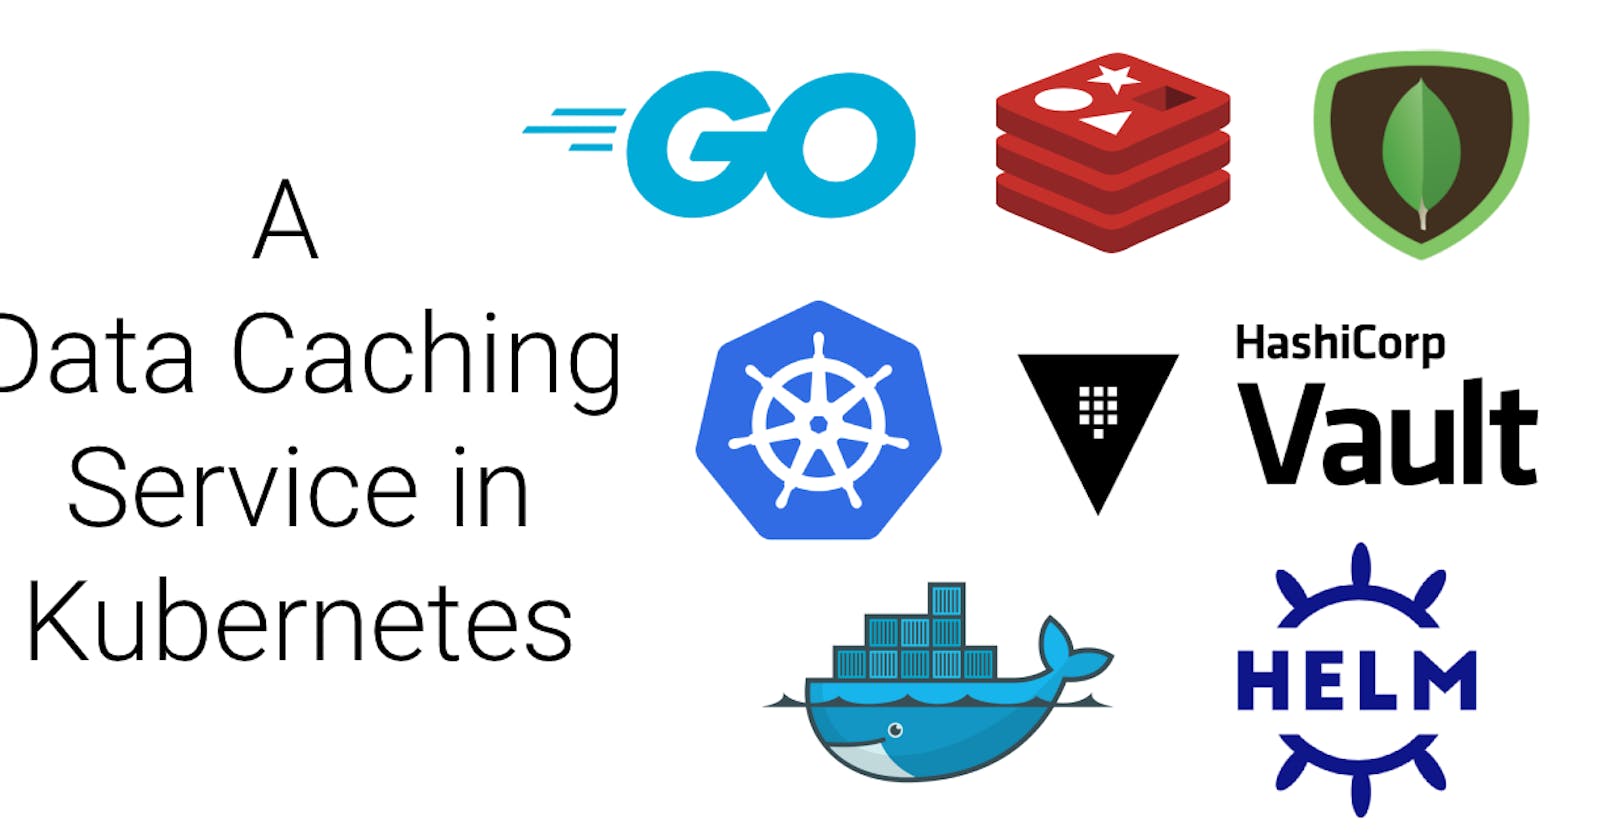 A Data Caching Service in Kubernetes